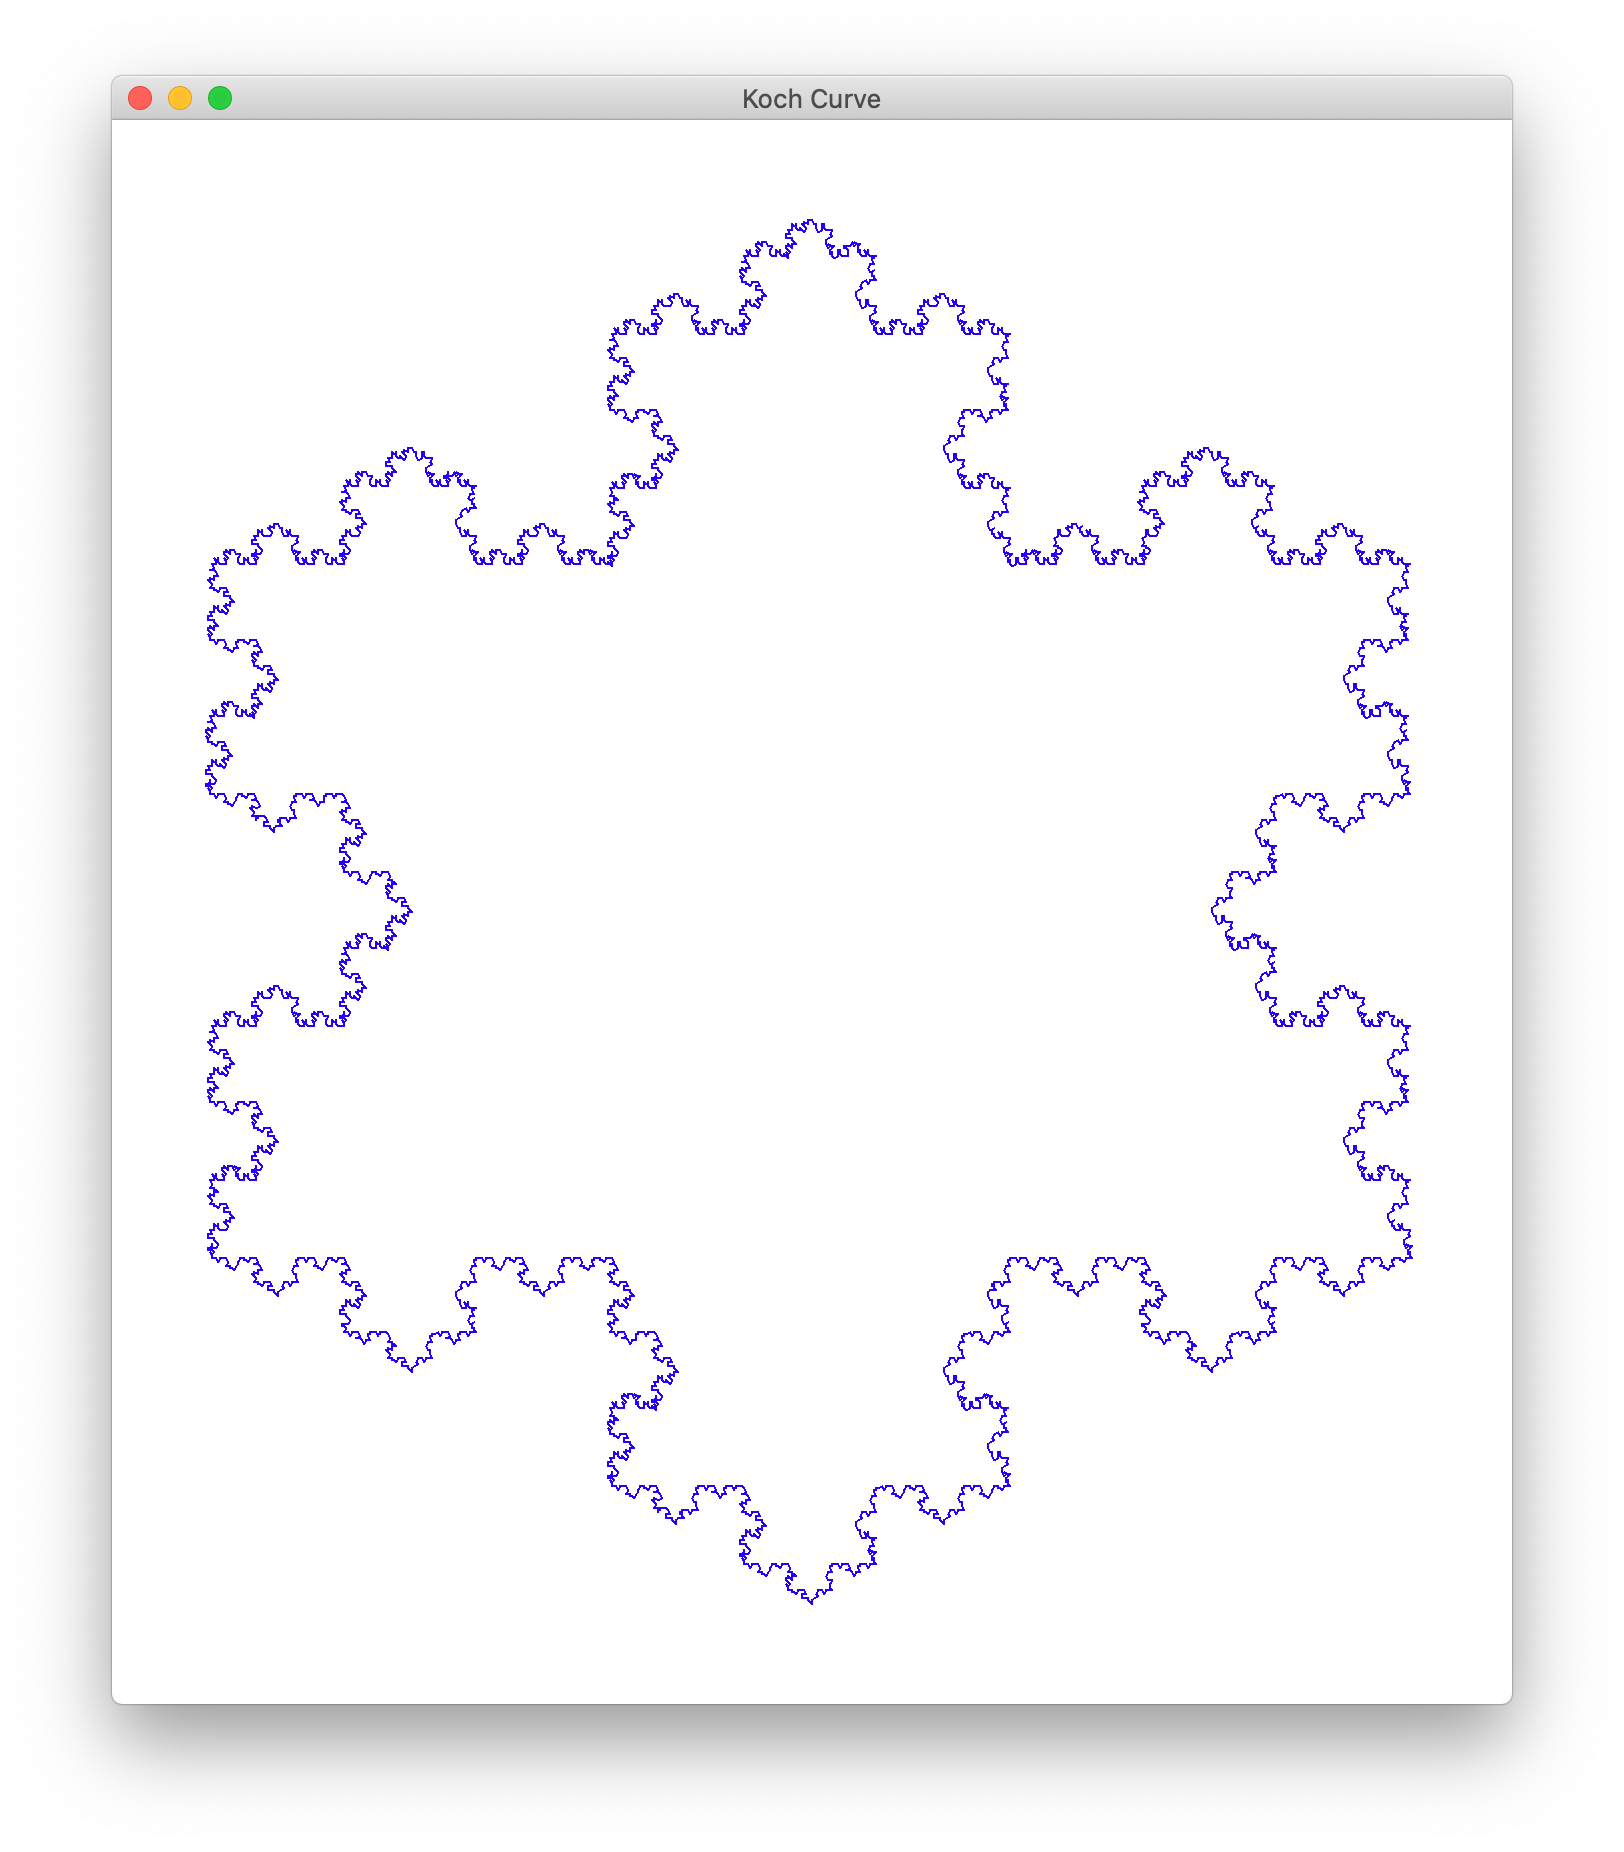 The complete Koch curve.